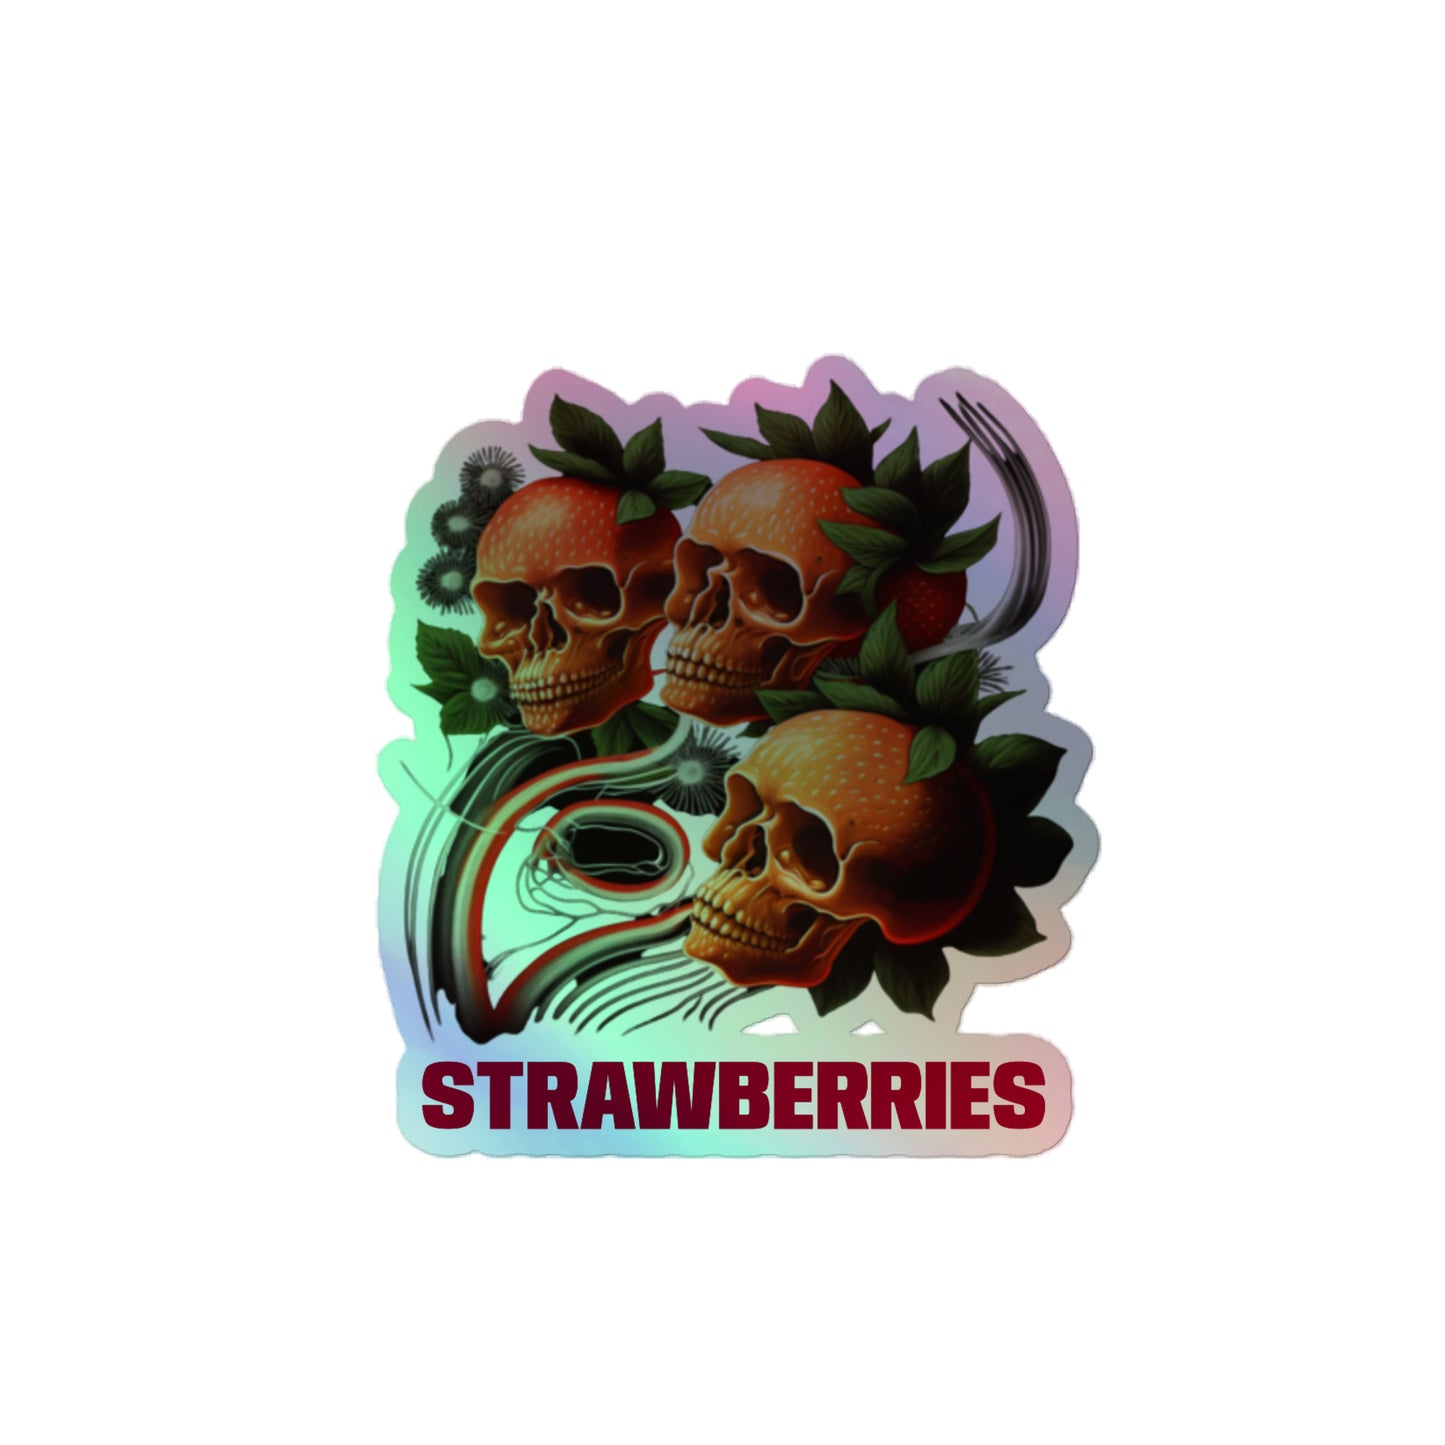 "Strawberry" Holographic stickers